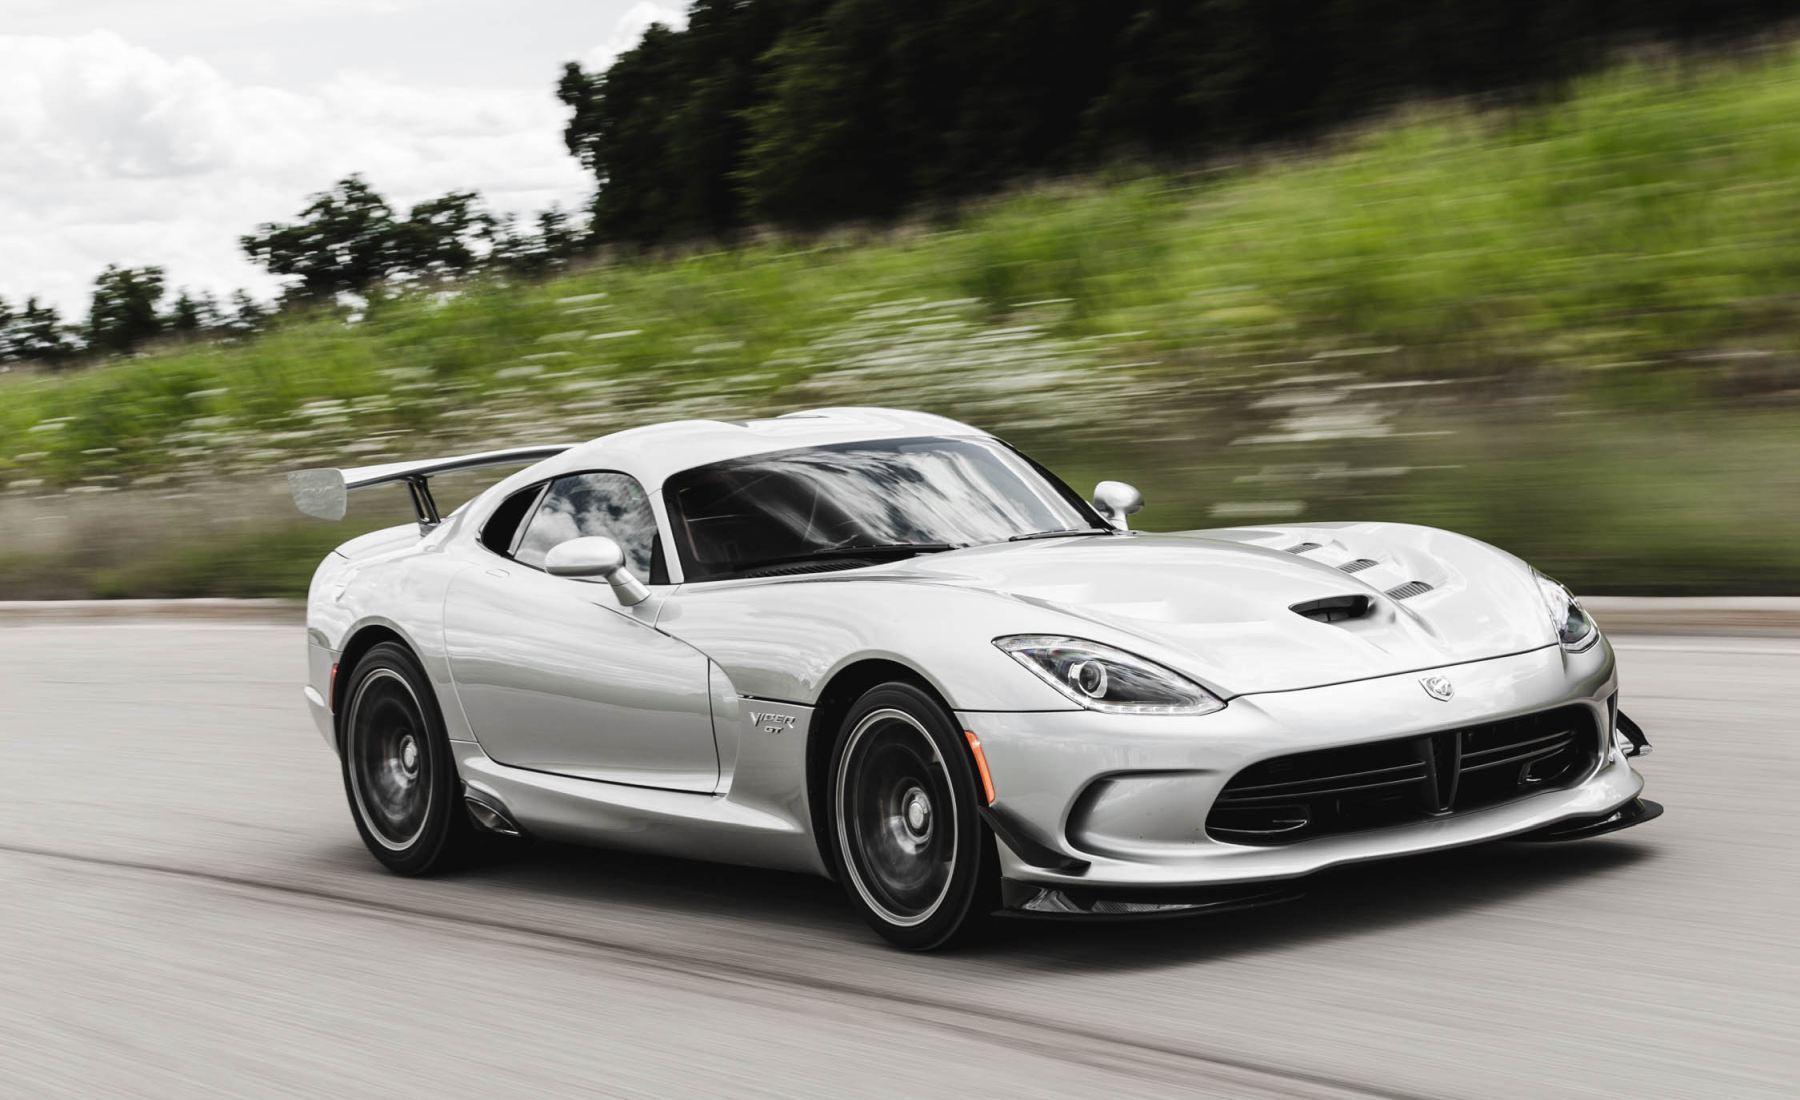 Dodge Viper price, image, release date, changes